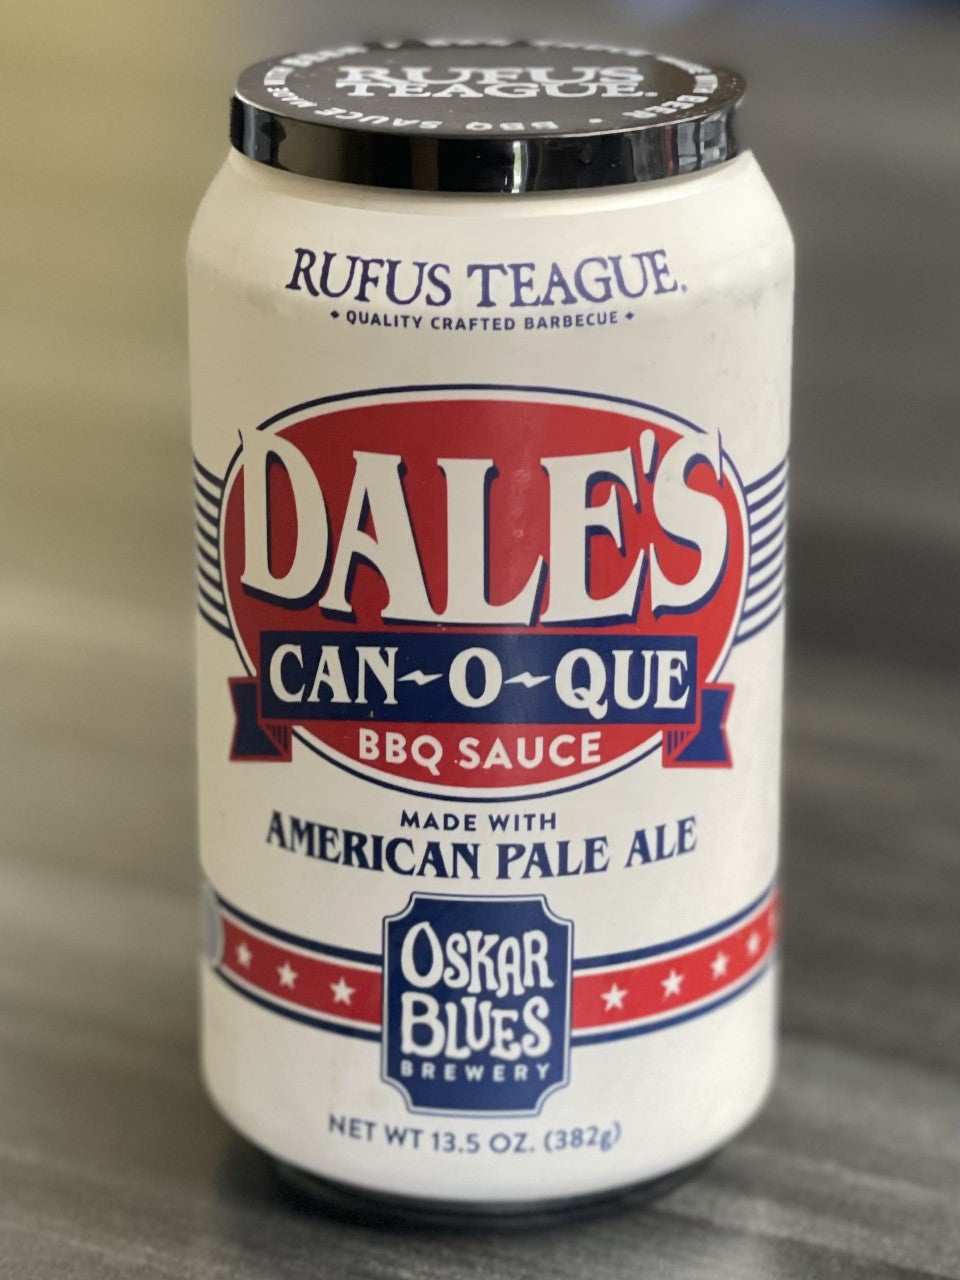 Can-O-Que Dale's BBQ Sauce made with Pale Ale